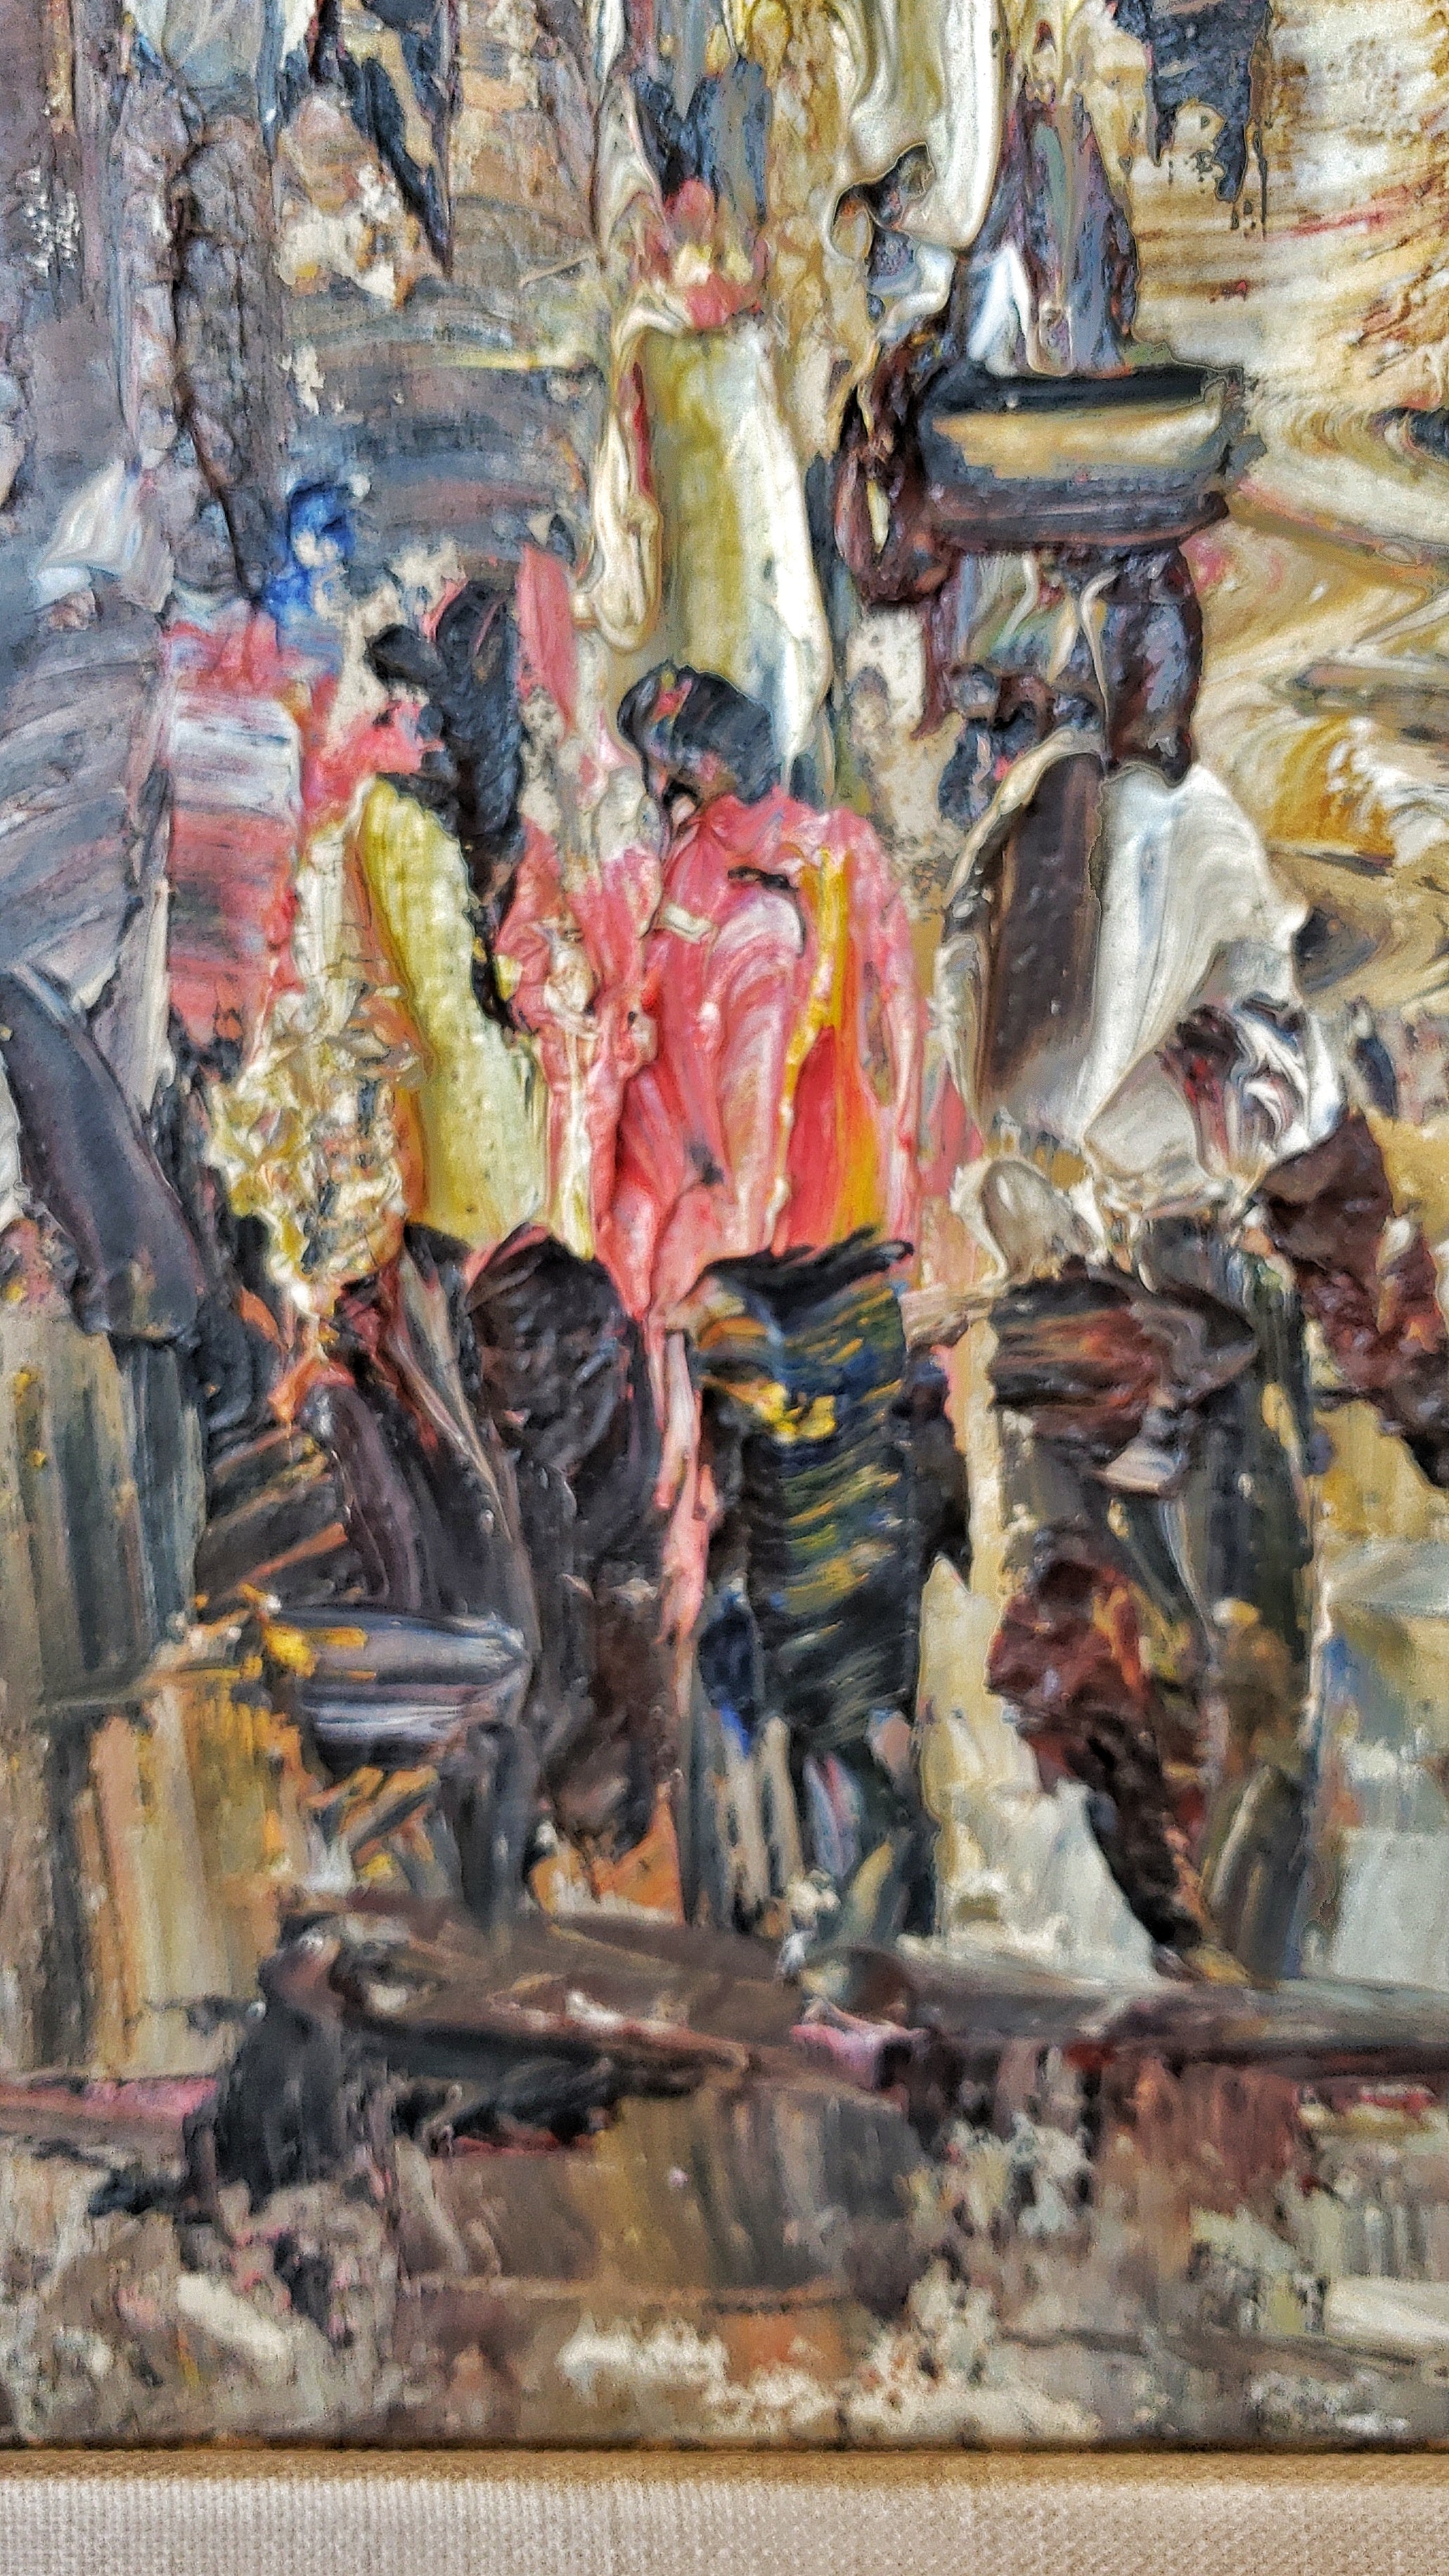 STREET SCENE WITH CARRIAGE - OIL IMPASTO ON CANVAS